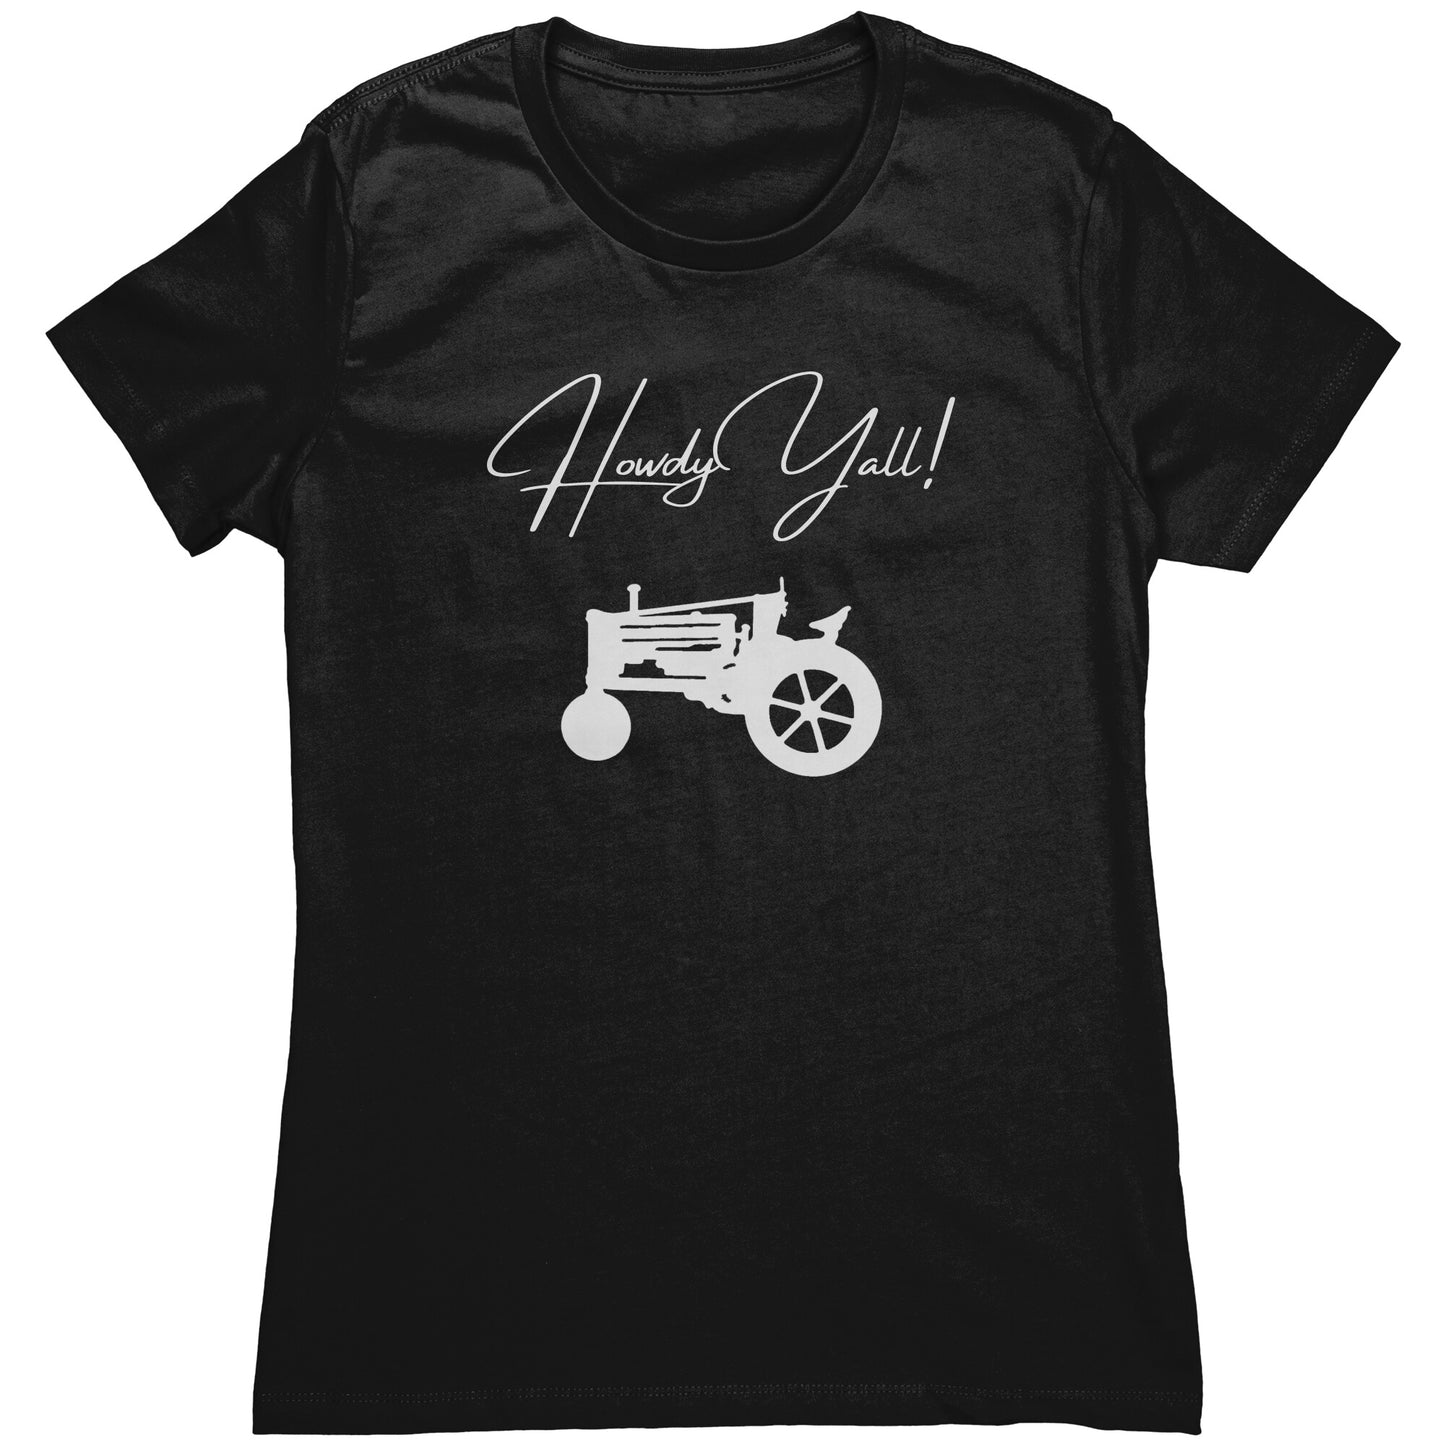 Fun and Cute Farm "Howdy Y'all" Shirt with tractor